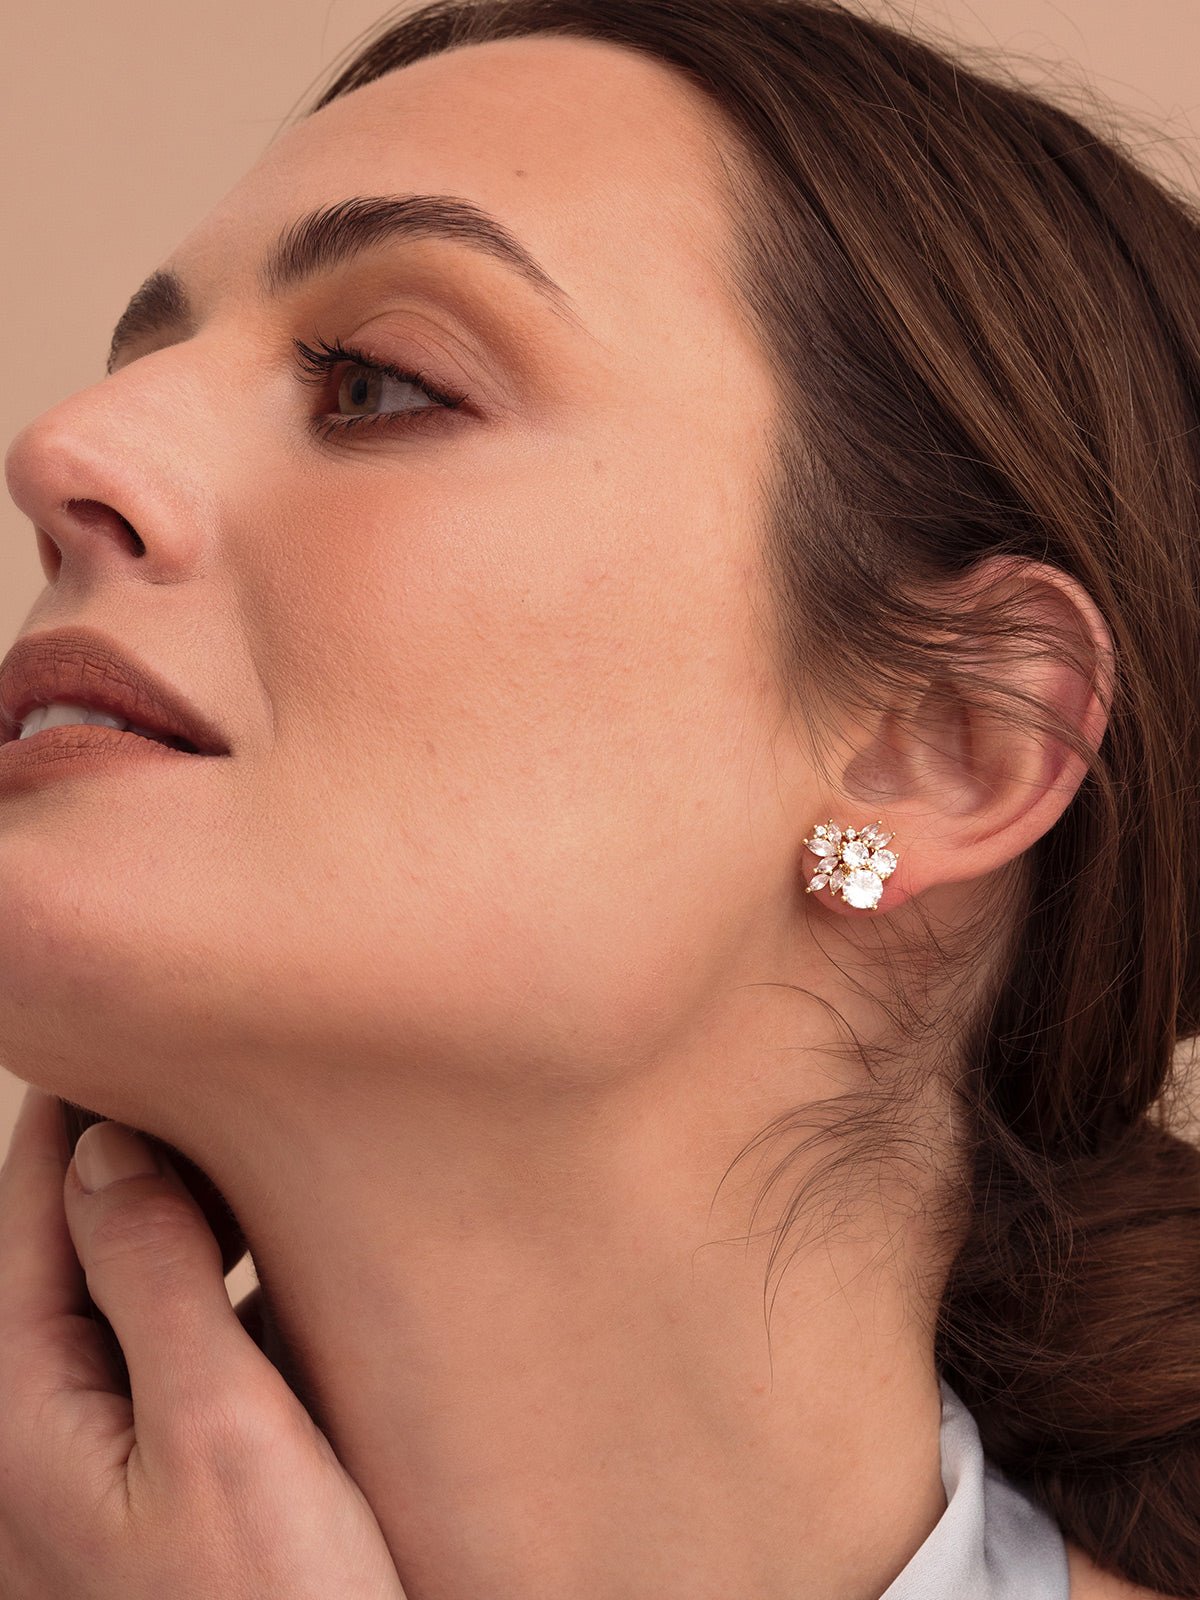 Carlton London Gold Plated CZ Studded Contemporary Stud Earrings For W   Carlton London Online